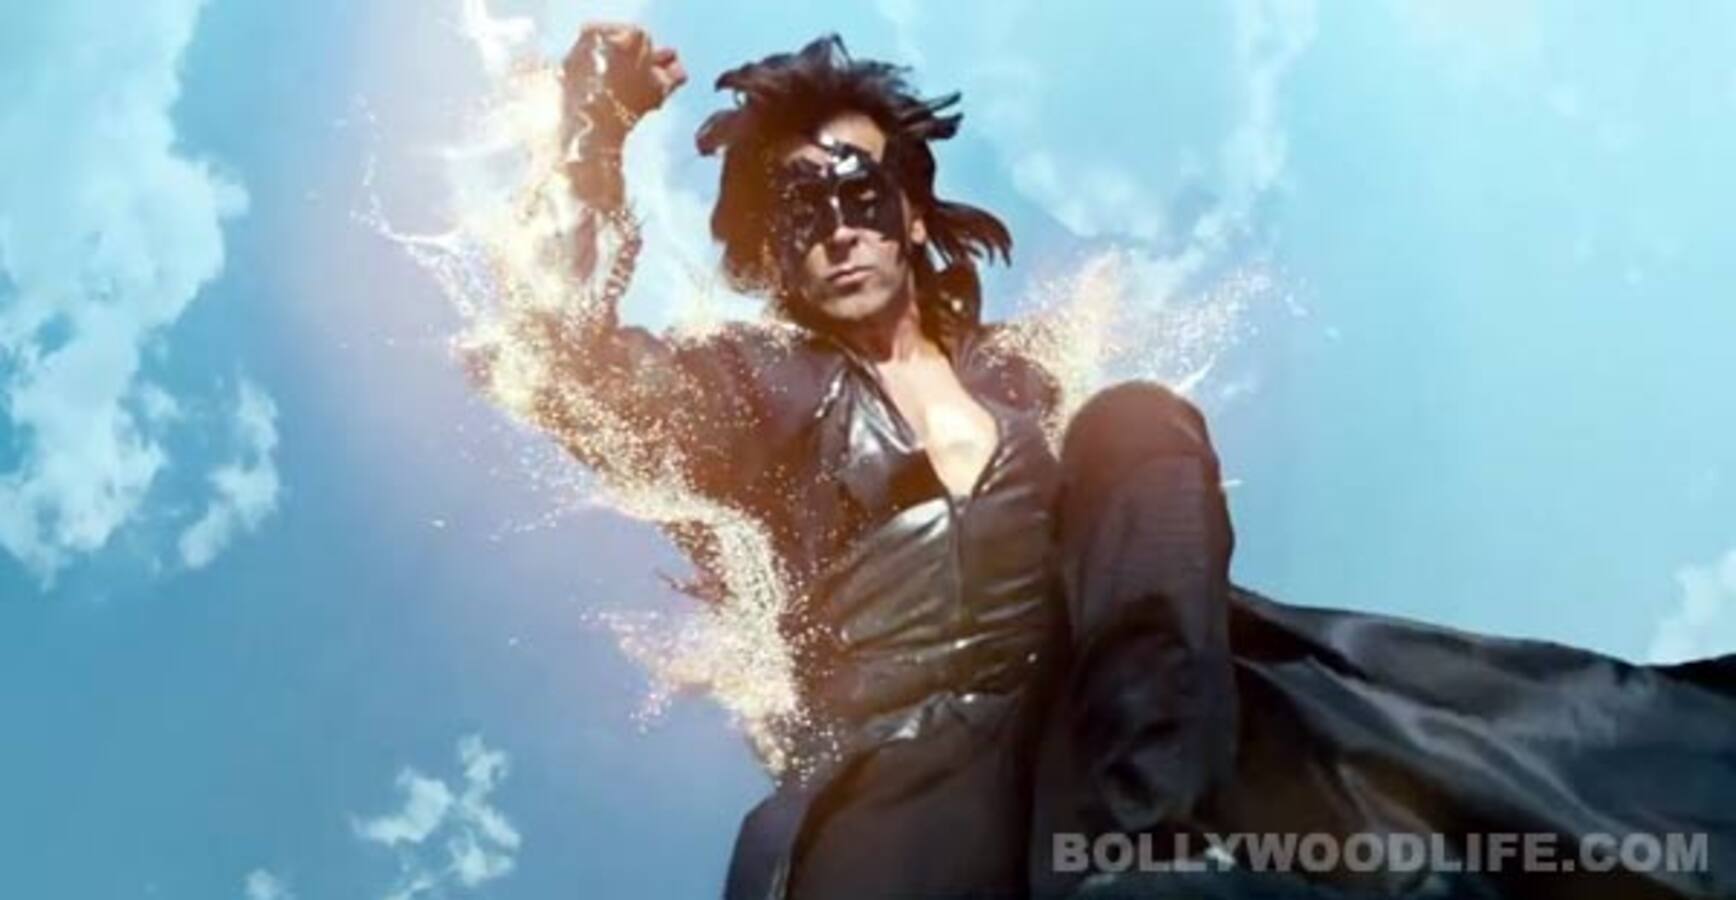 Krrish 3 movie review: A formulaic superhero adventure powered by showy  visual effects - Bollywood News & Gossip, Movie Reviews, Trailers & Videos  at 